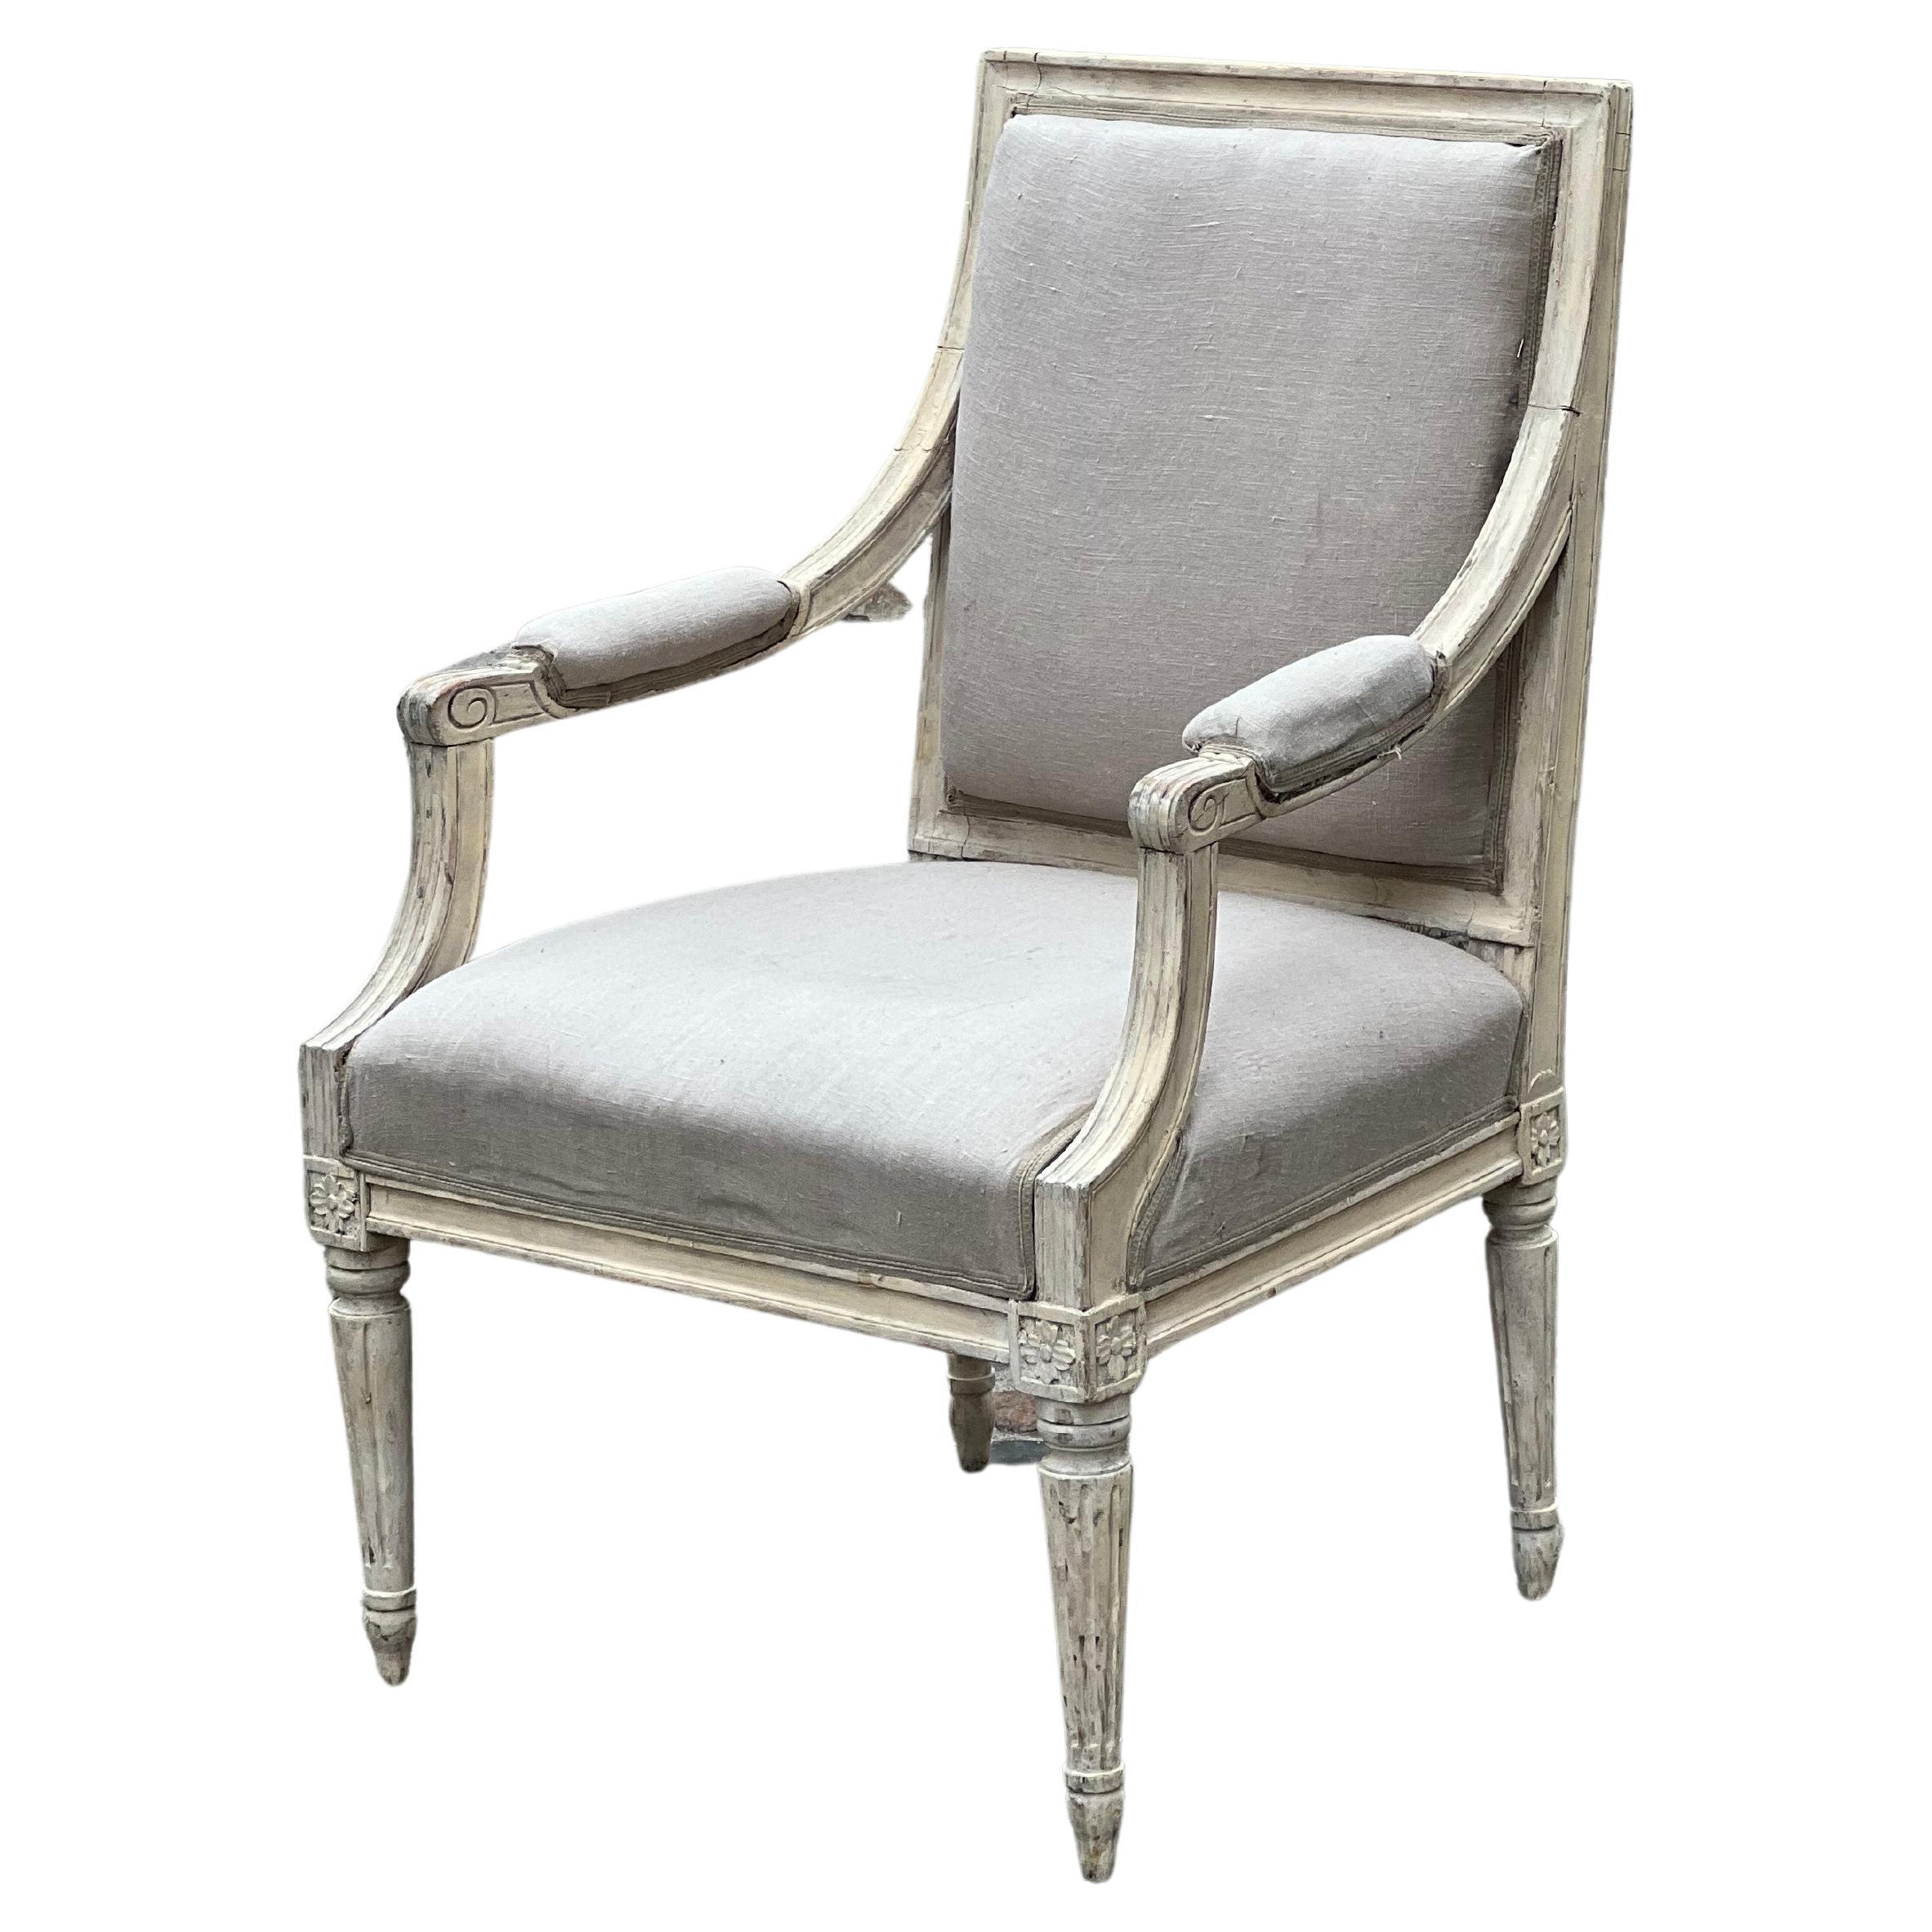 Large Painted Gustavian Periode Armchair, Stockholm, Sweden, Late 18th Century